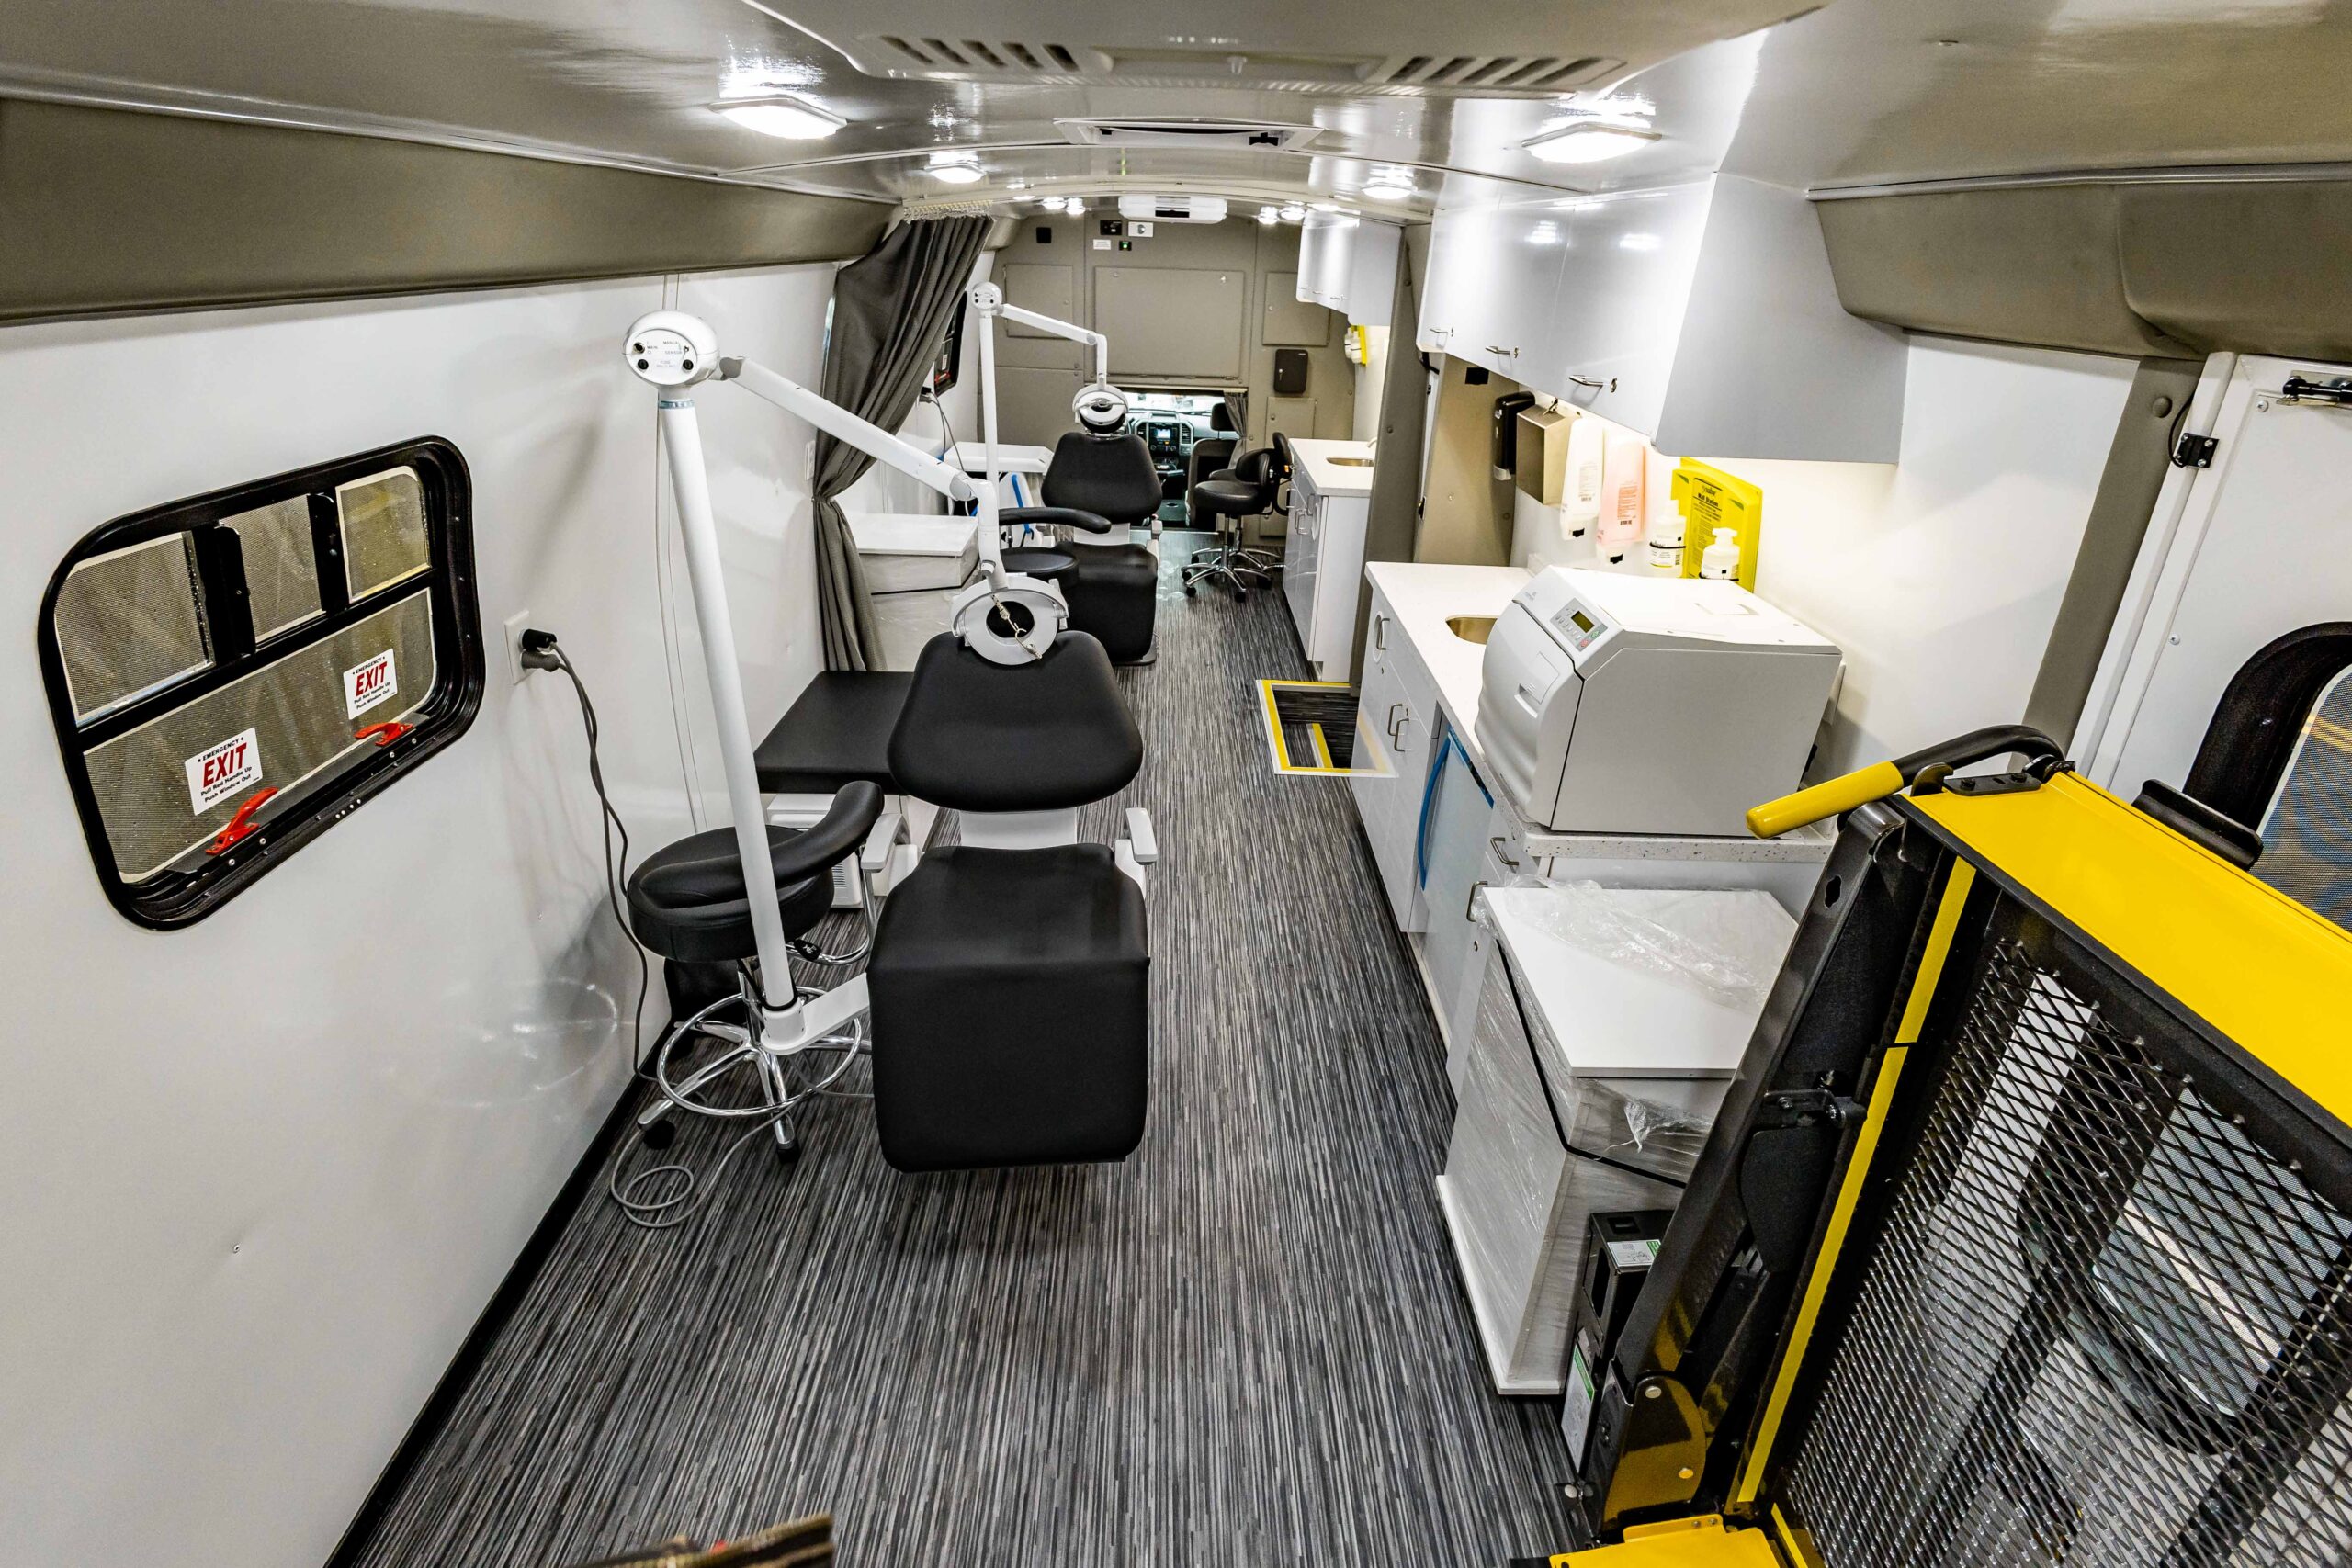 A mobile dental clinic